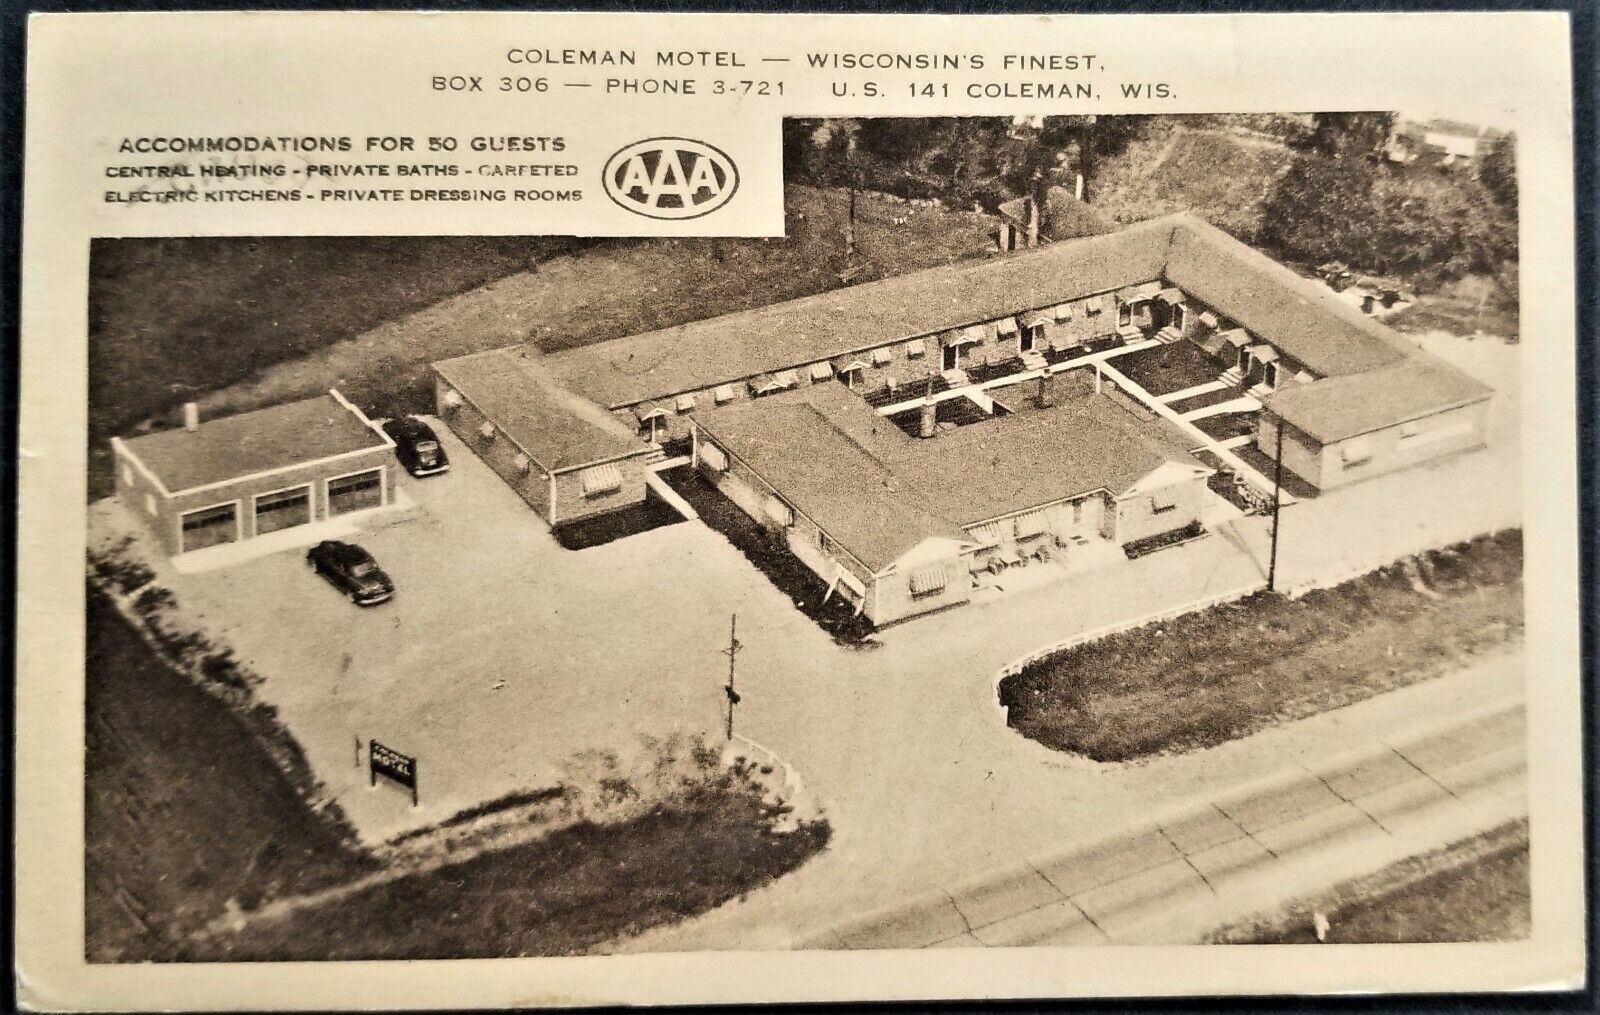 Roadside Motel: Coleman Motel, Aerial View, Cars, Coleman, WI. 1950s.